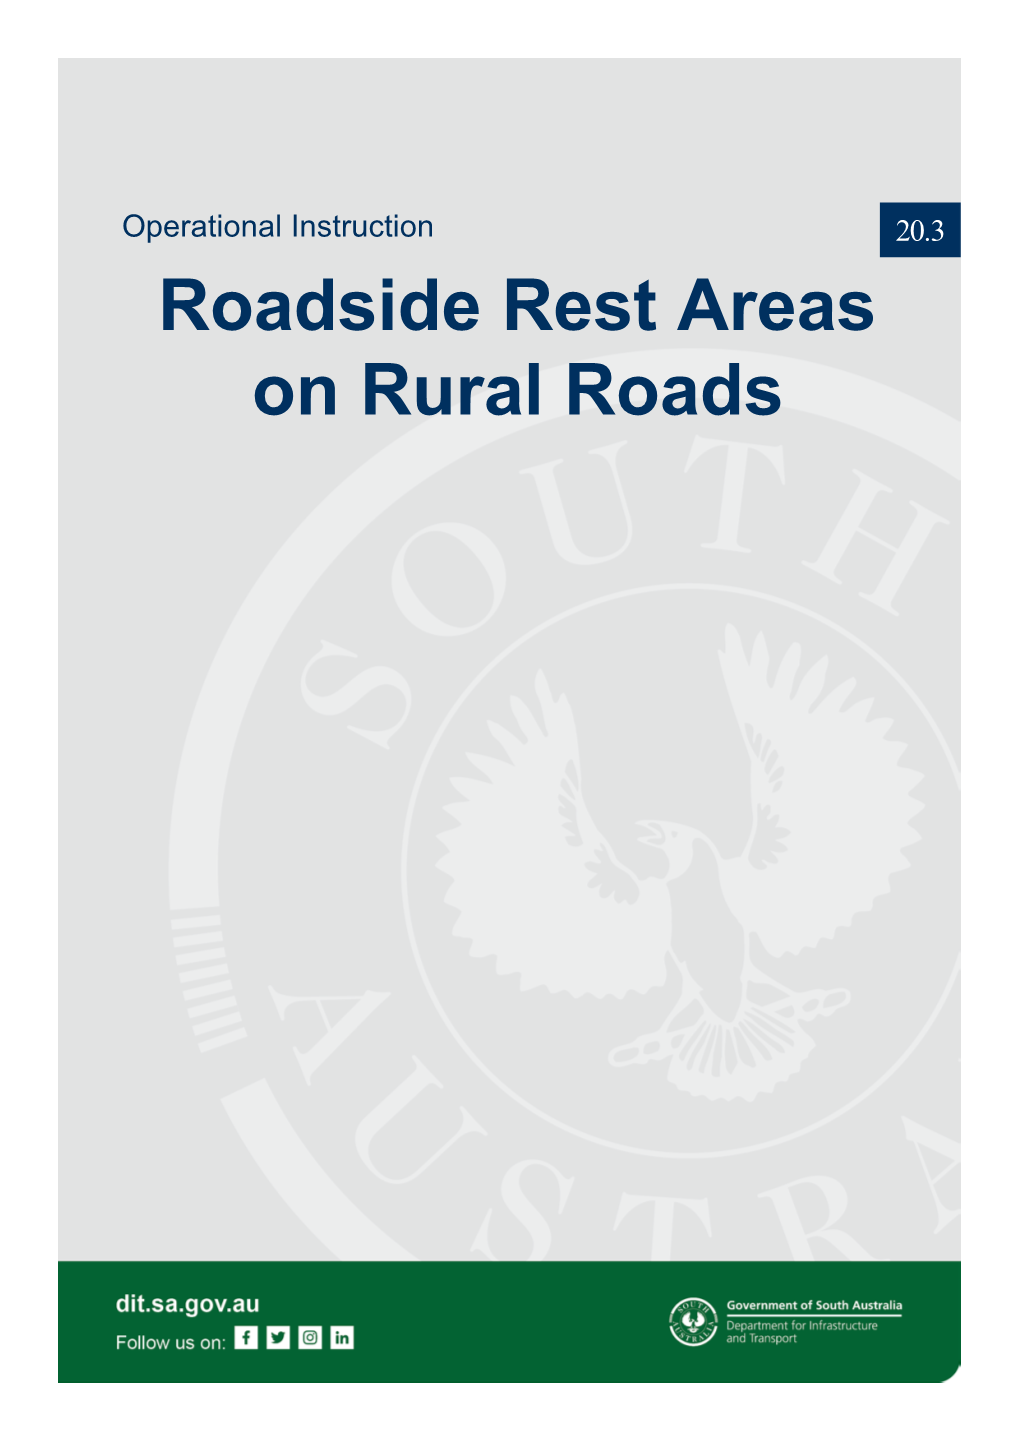 Operational Instruction 20.3 Roadside Rest Areas on Rural Roads